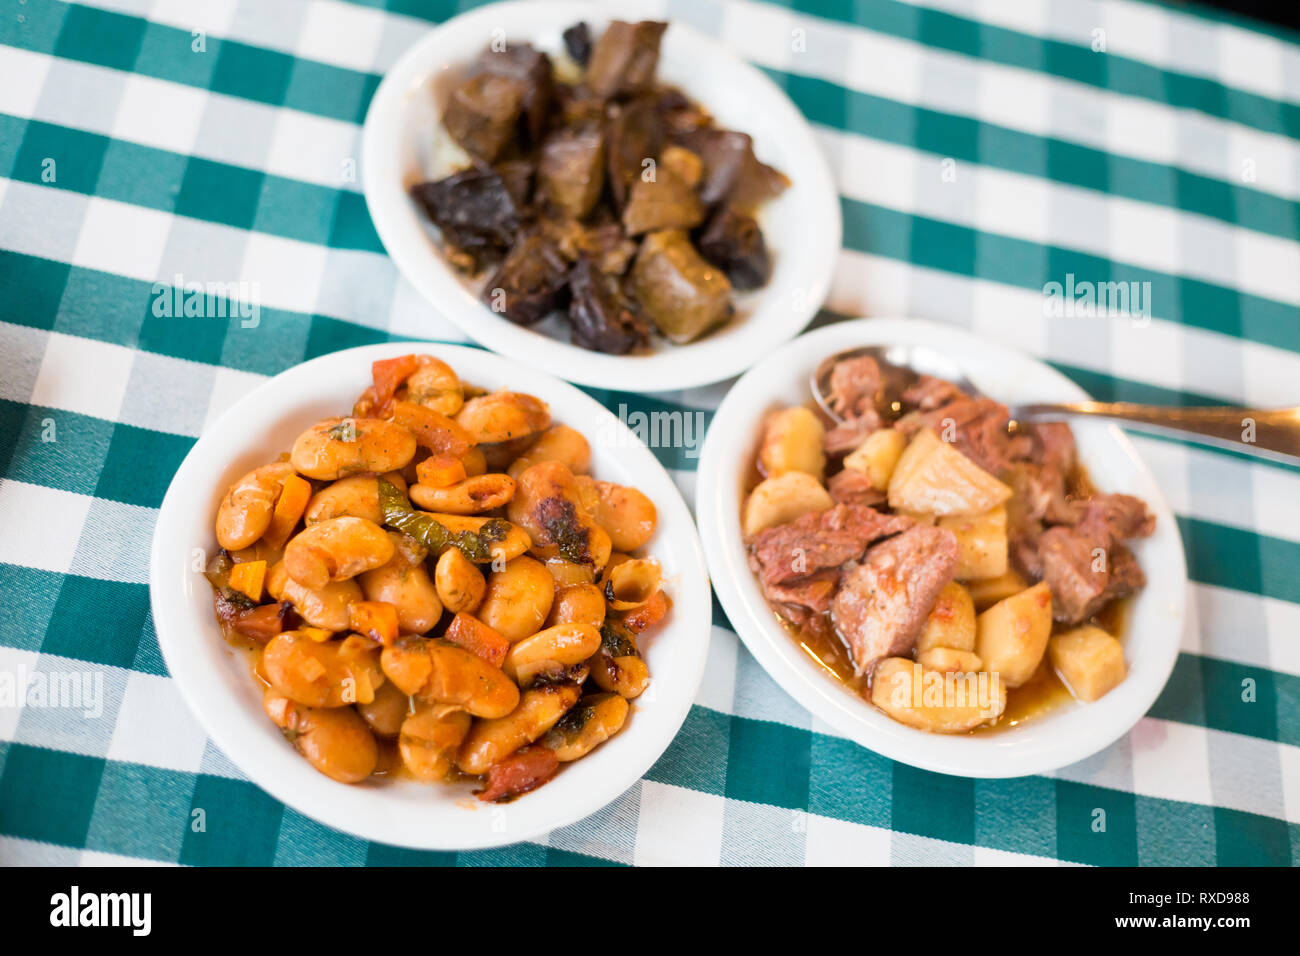 Food selection of bean, pork, liver and potato in local restaurant in Larnaca. Traditional cypriot meze food on Cyprus island. Stock Photo